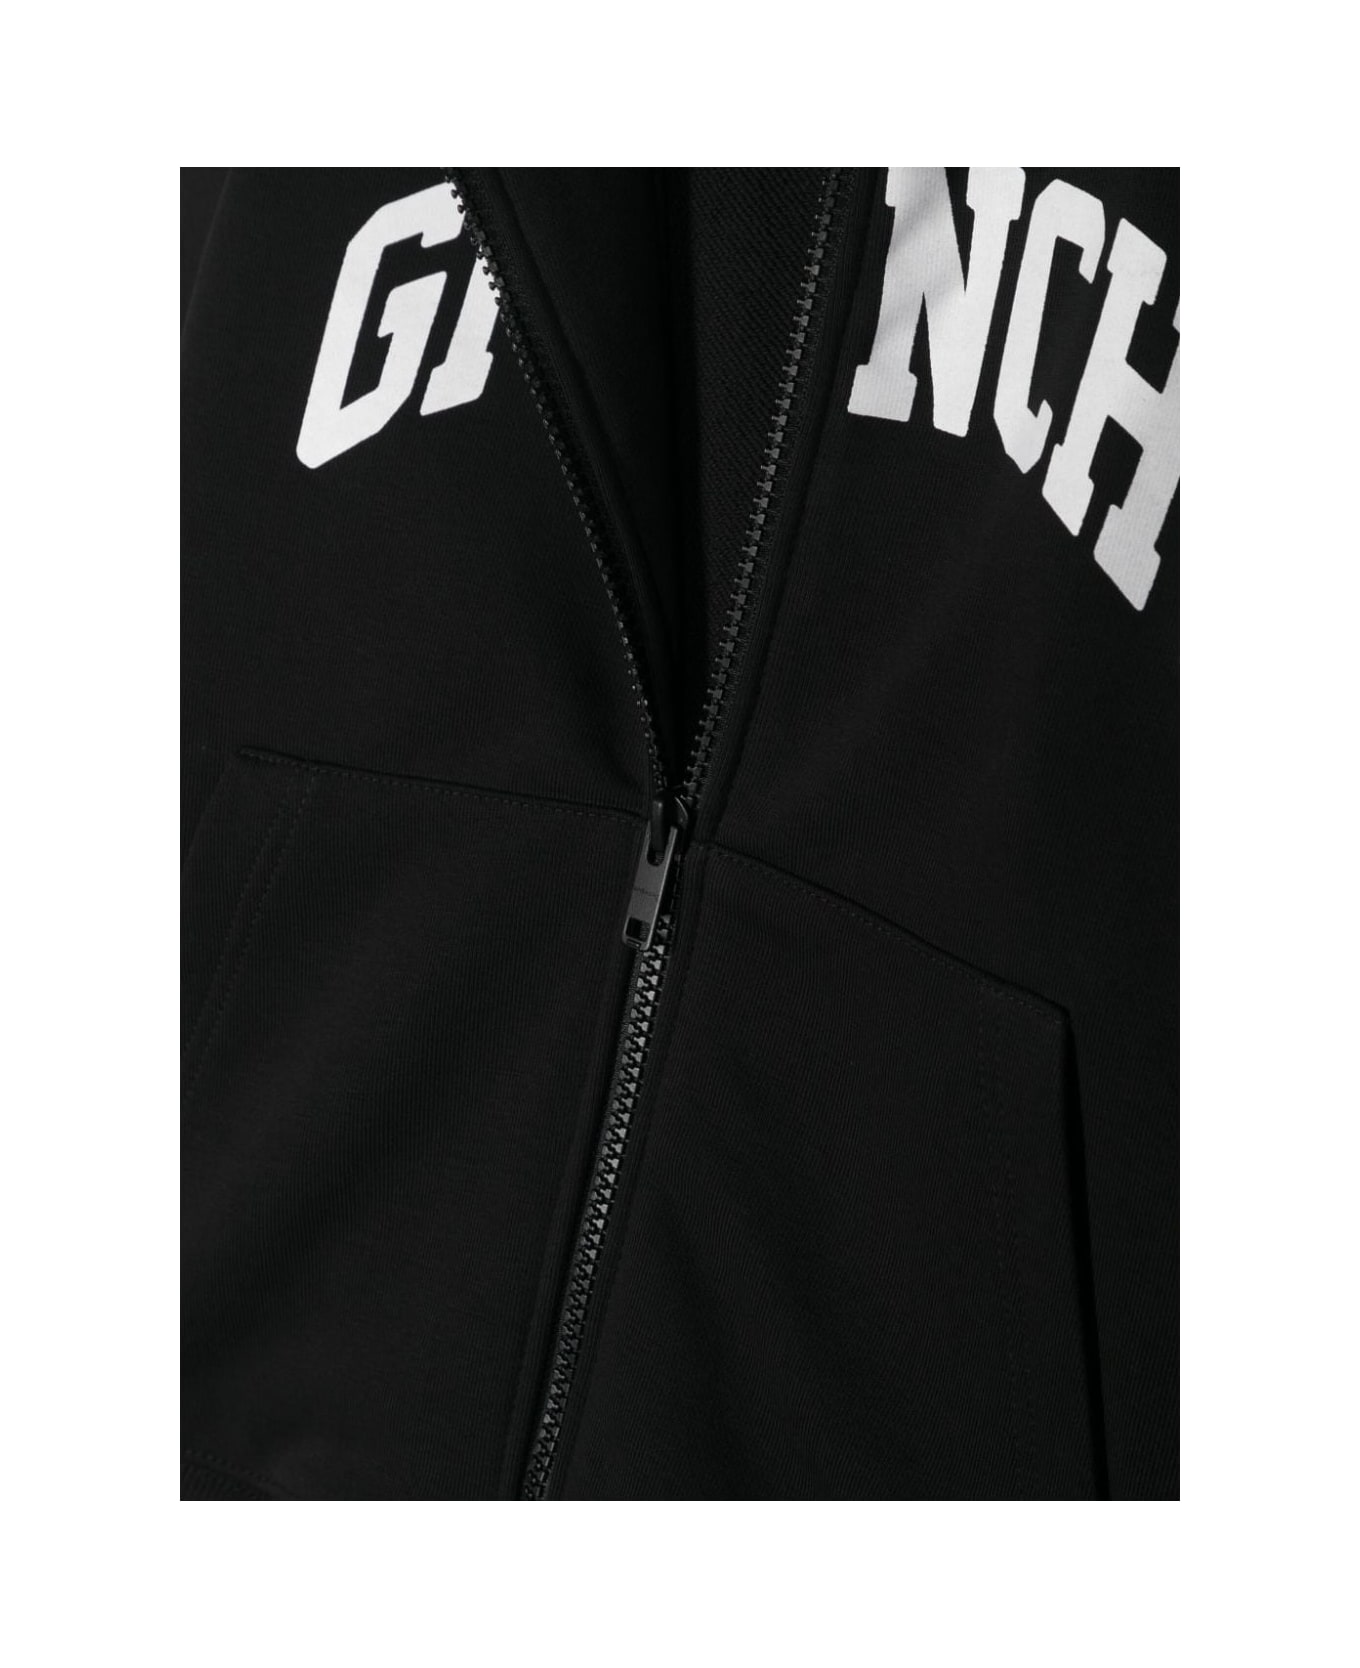 Givenchy square-frame Hoodie - Black